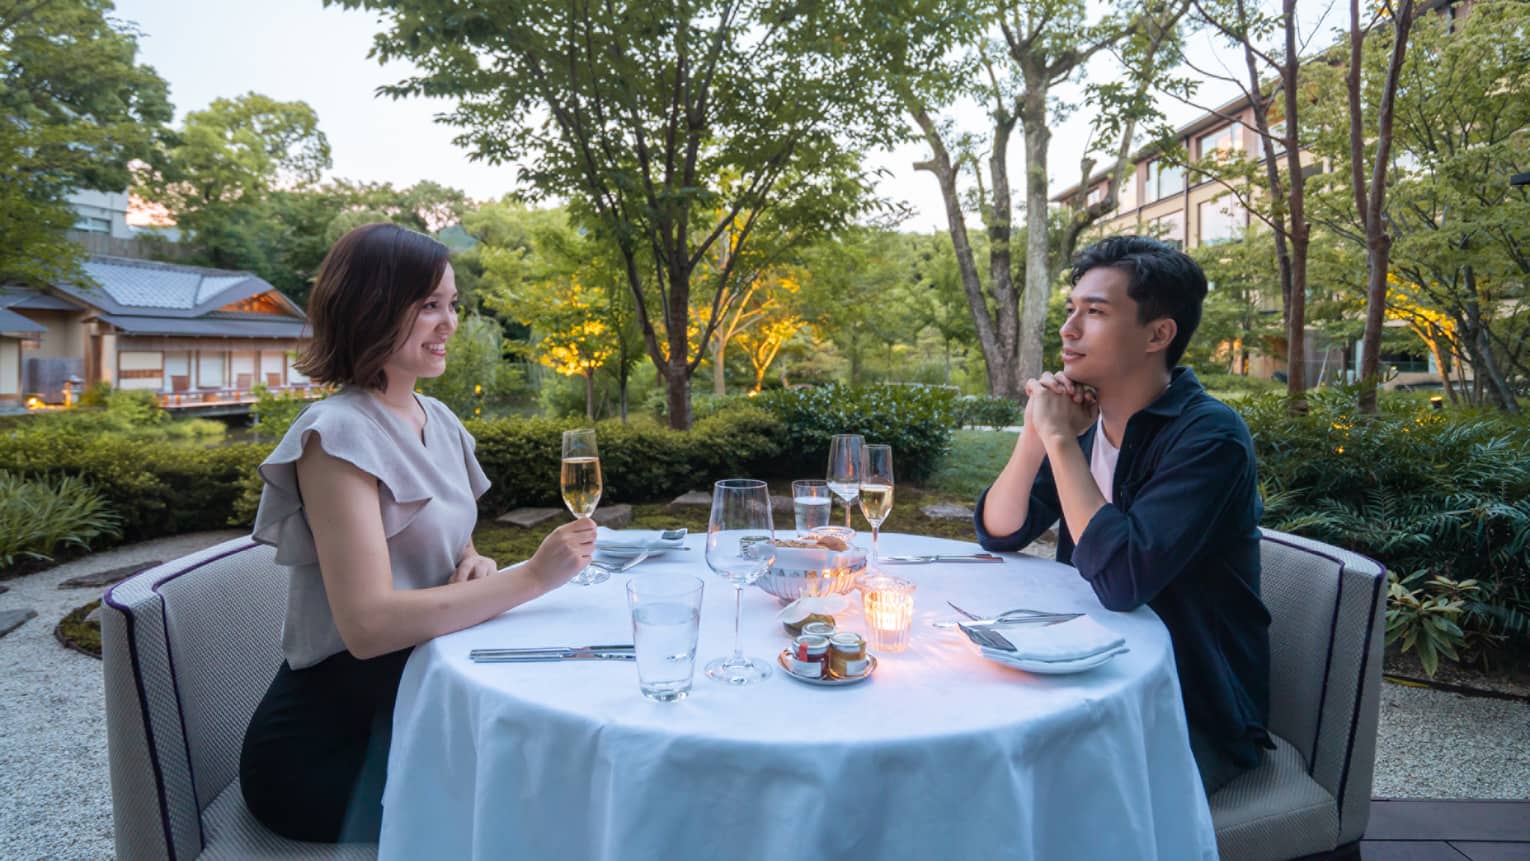 Couple shares romantic dinner outdoors at the pond garden